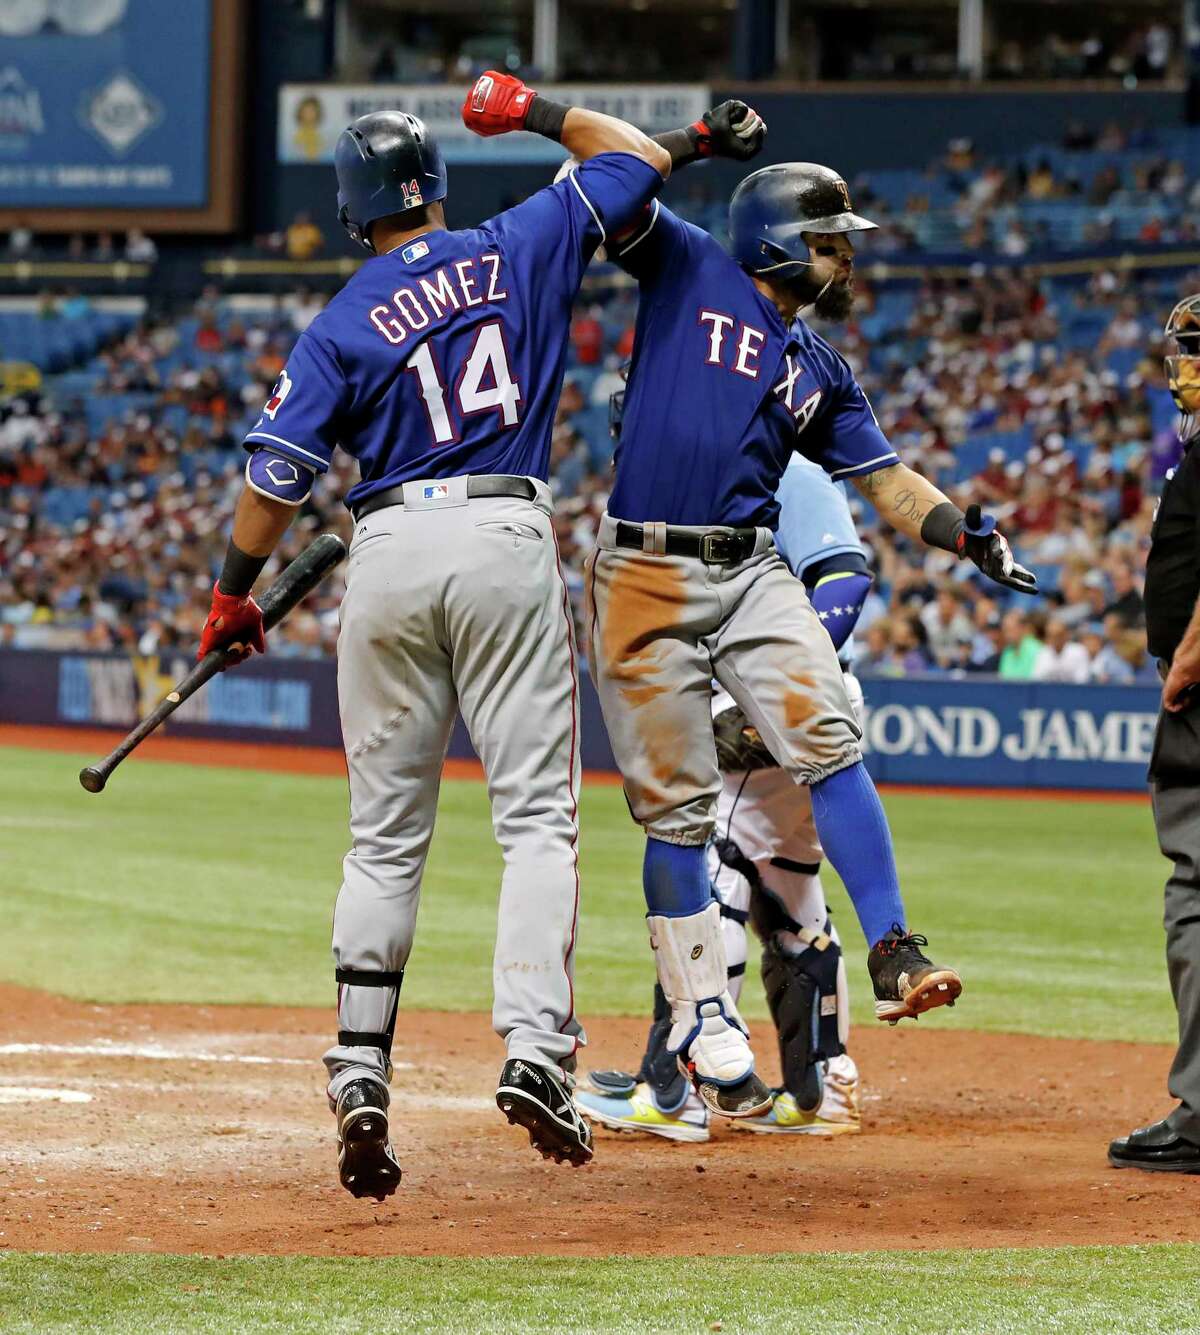 Texas Rangers' Rougned Odor, right, celebrates his two-run home run with Carlos Gomez during the eighth inning of a baseball game against the Tampa Bay Rays, Sunday, July 23, 2017, in St. Petersburg, Fla. (AP Photo/Mike Carlson)